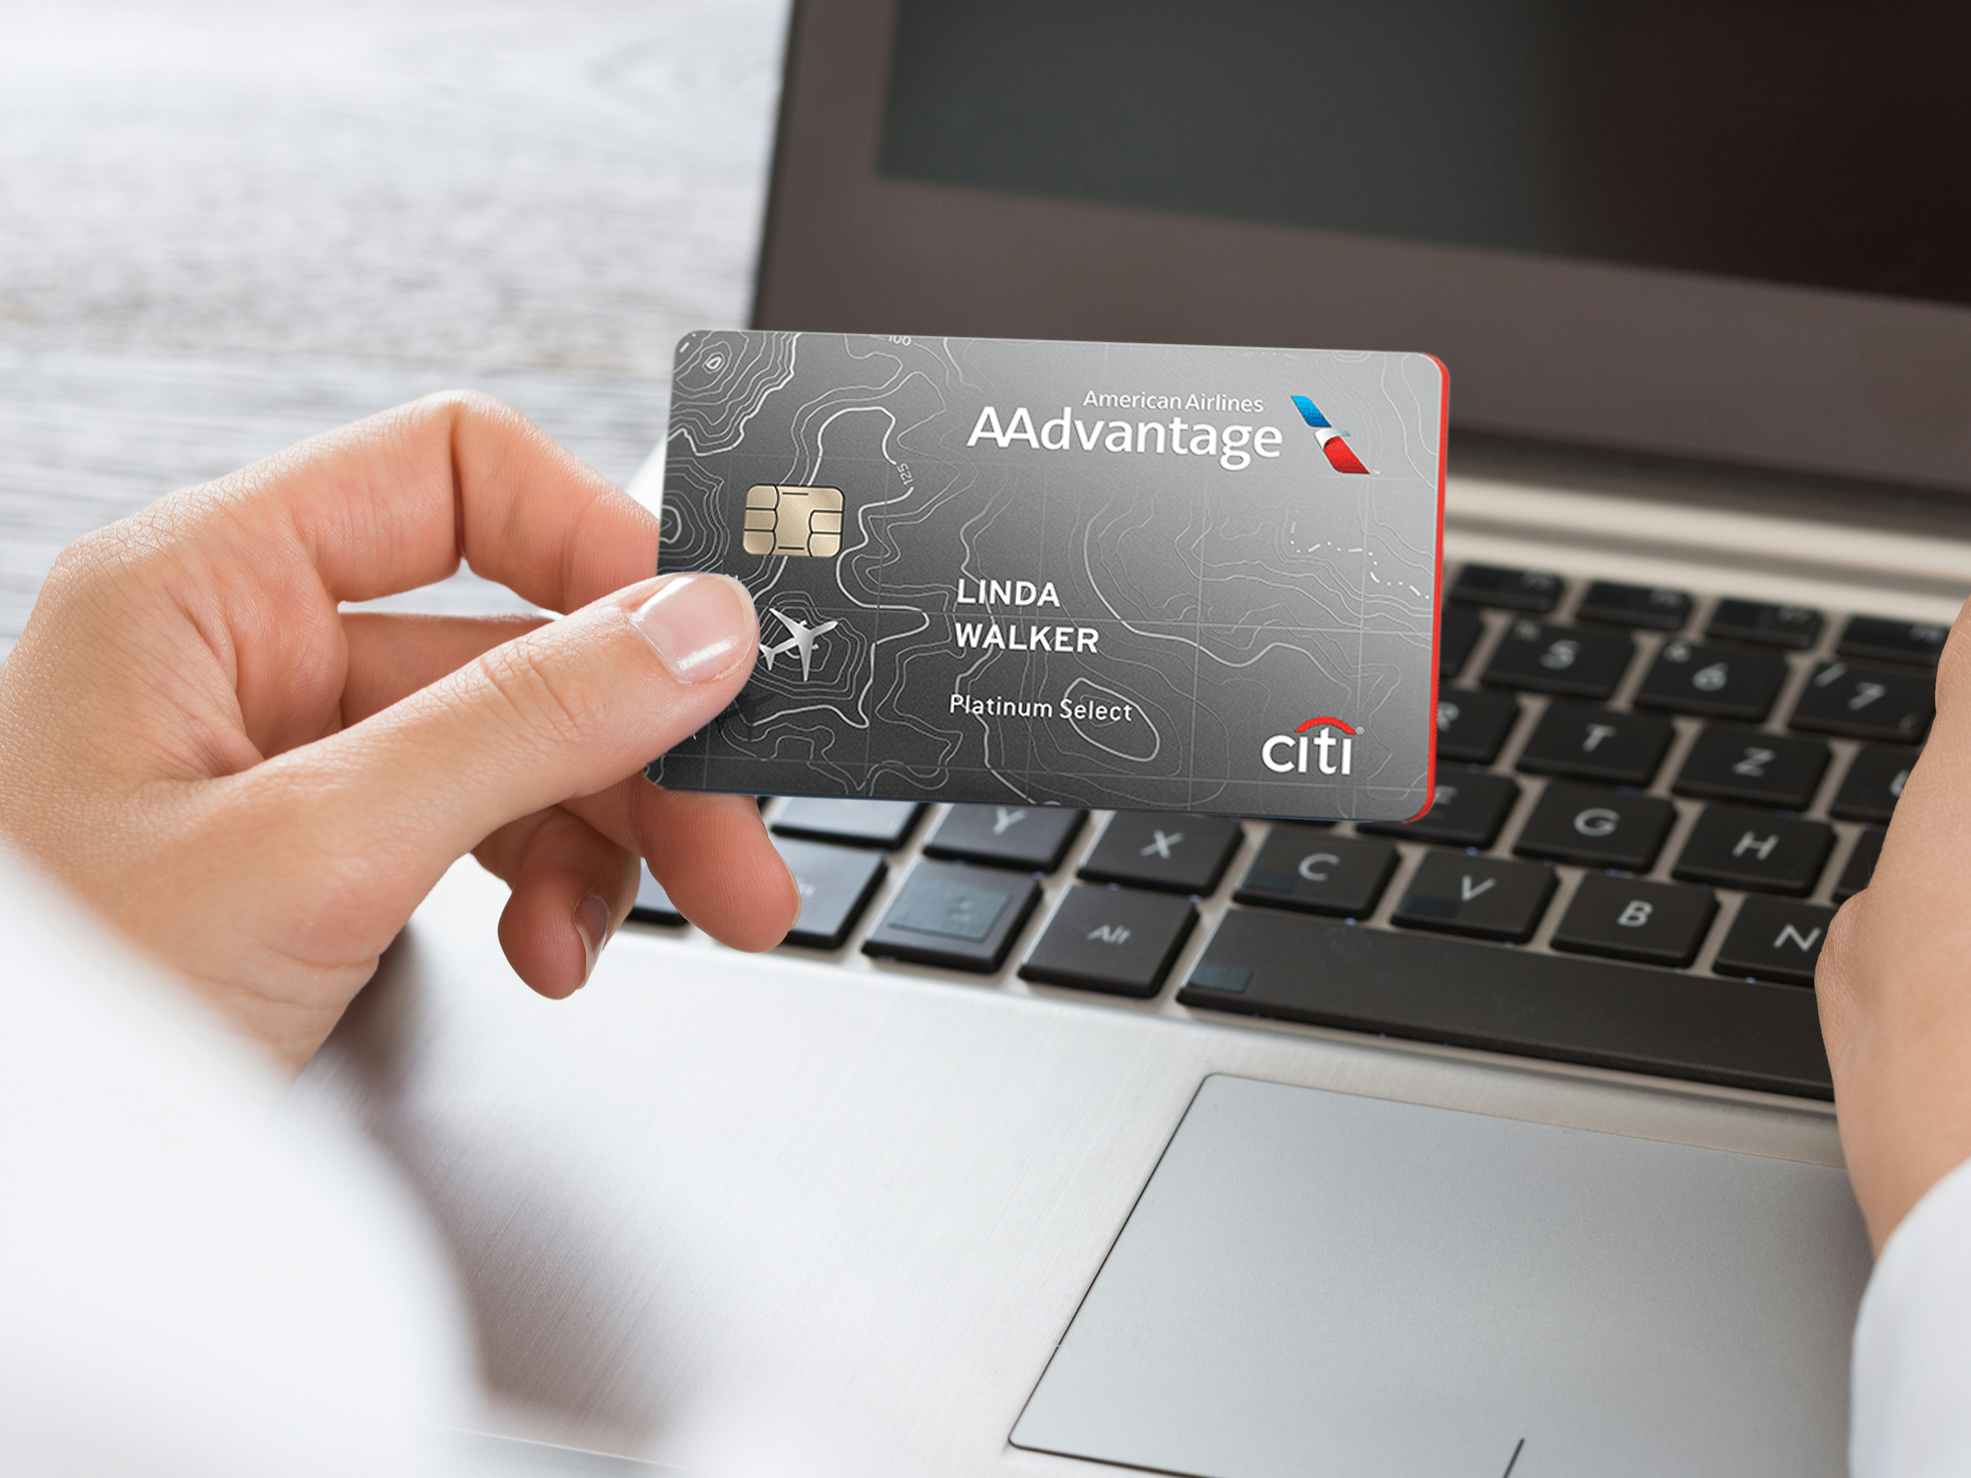 Someone holding an American Airlines Aadvantage credit card